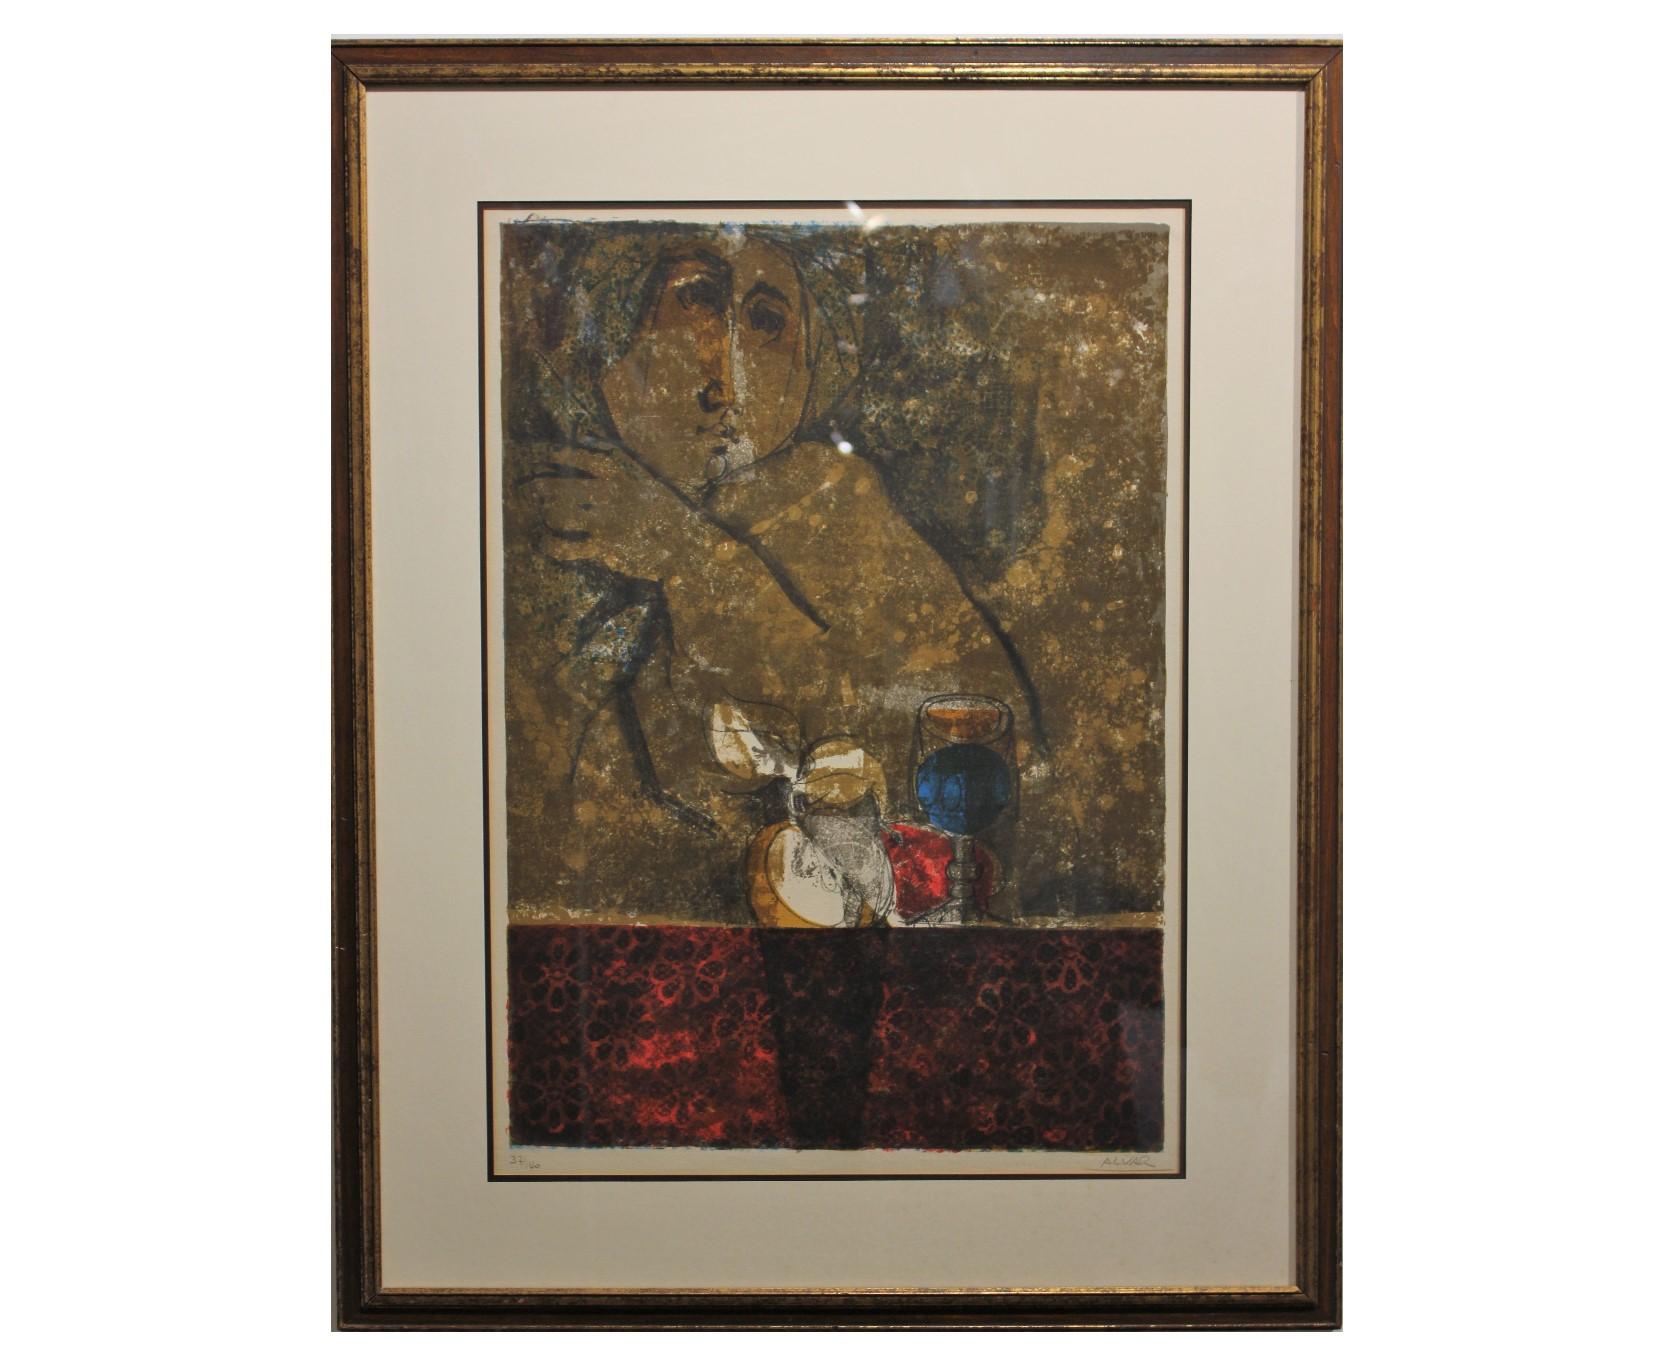 Earth-Toned Abstract Figurative Woman with Drinking Glasses 137/140